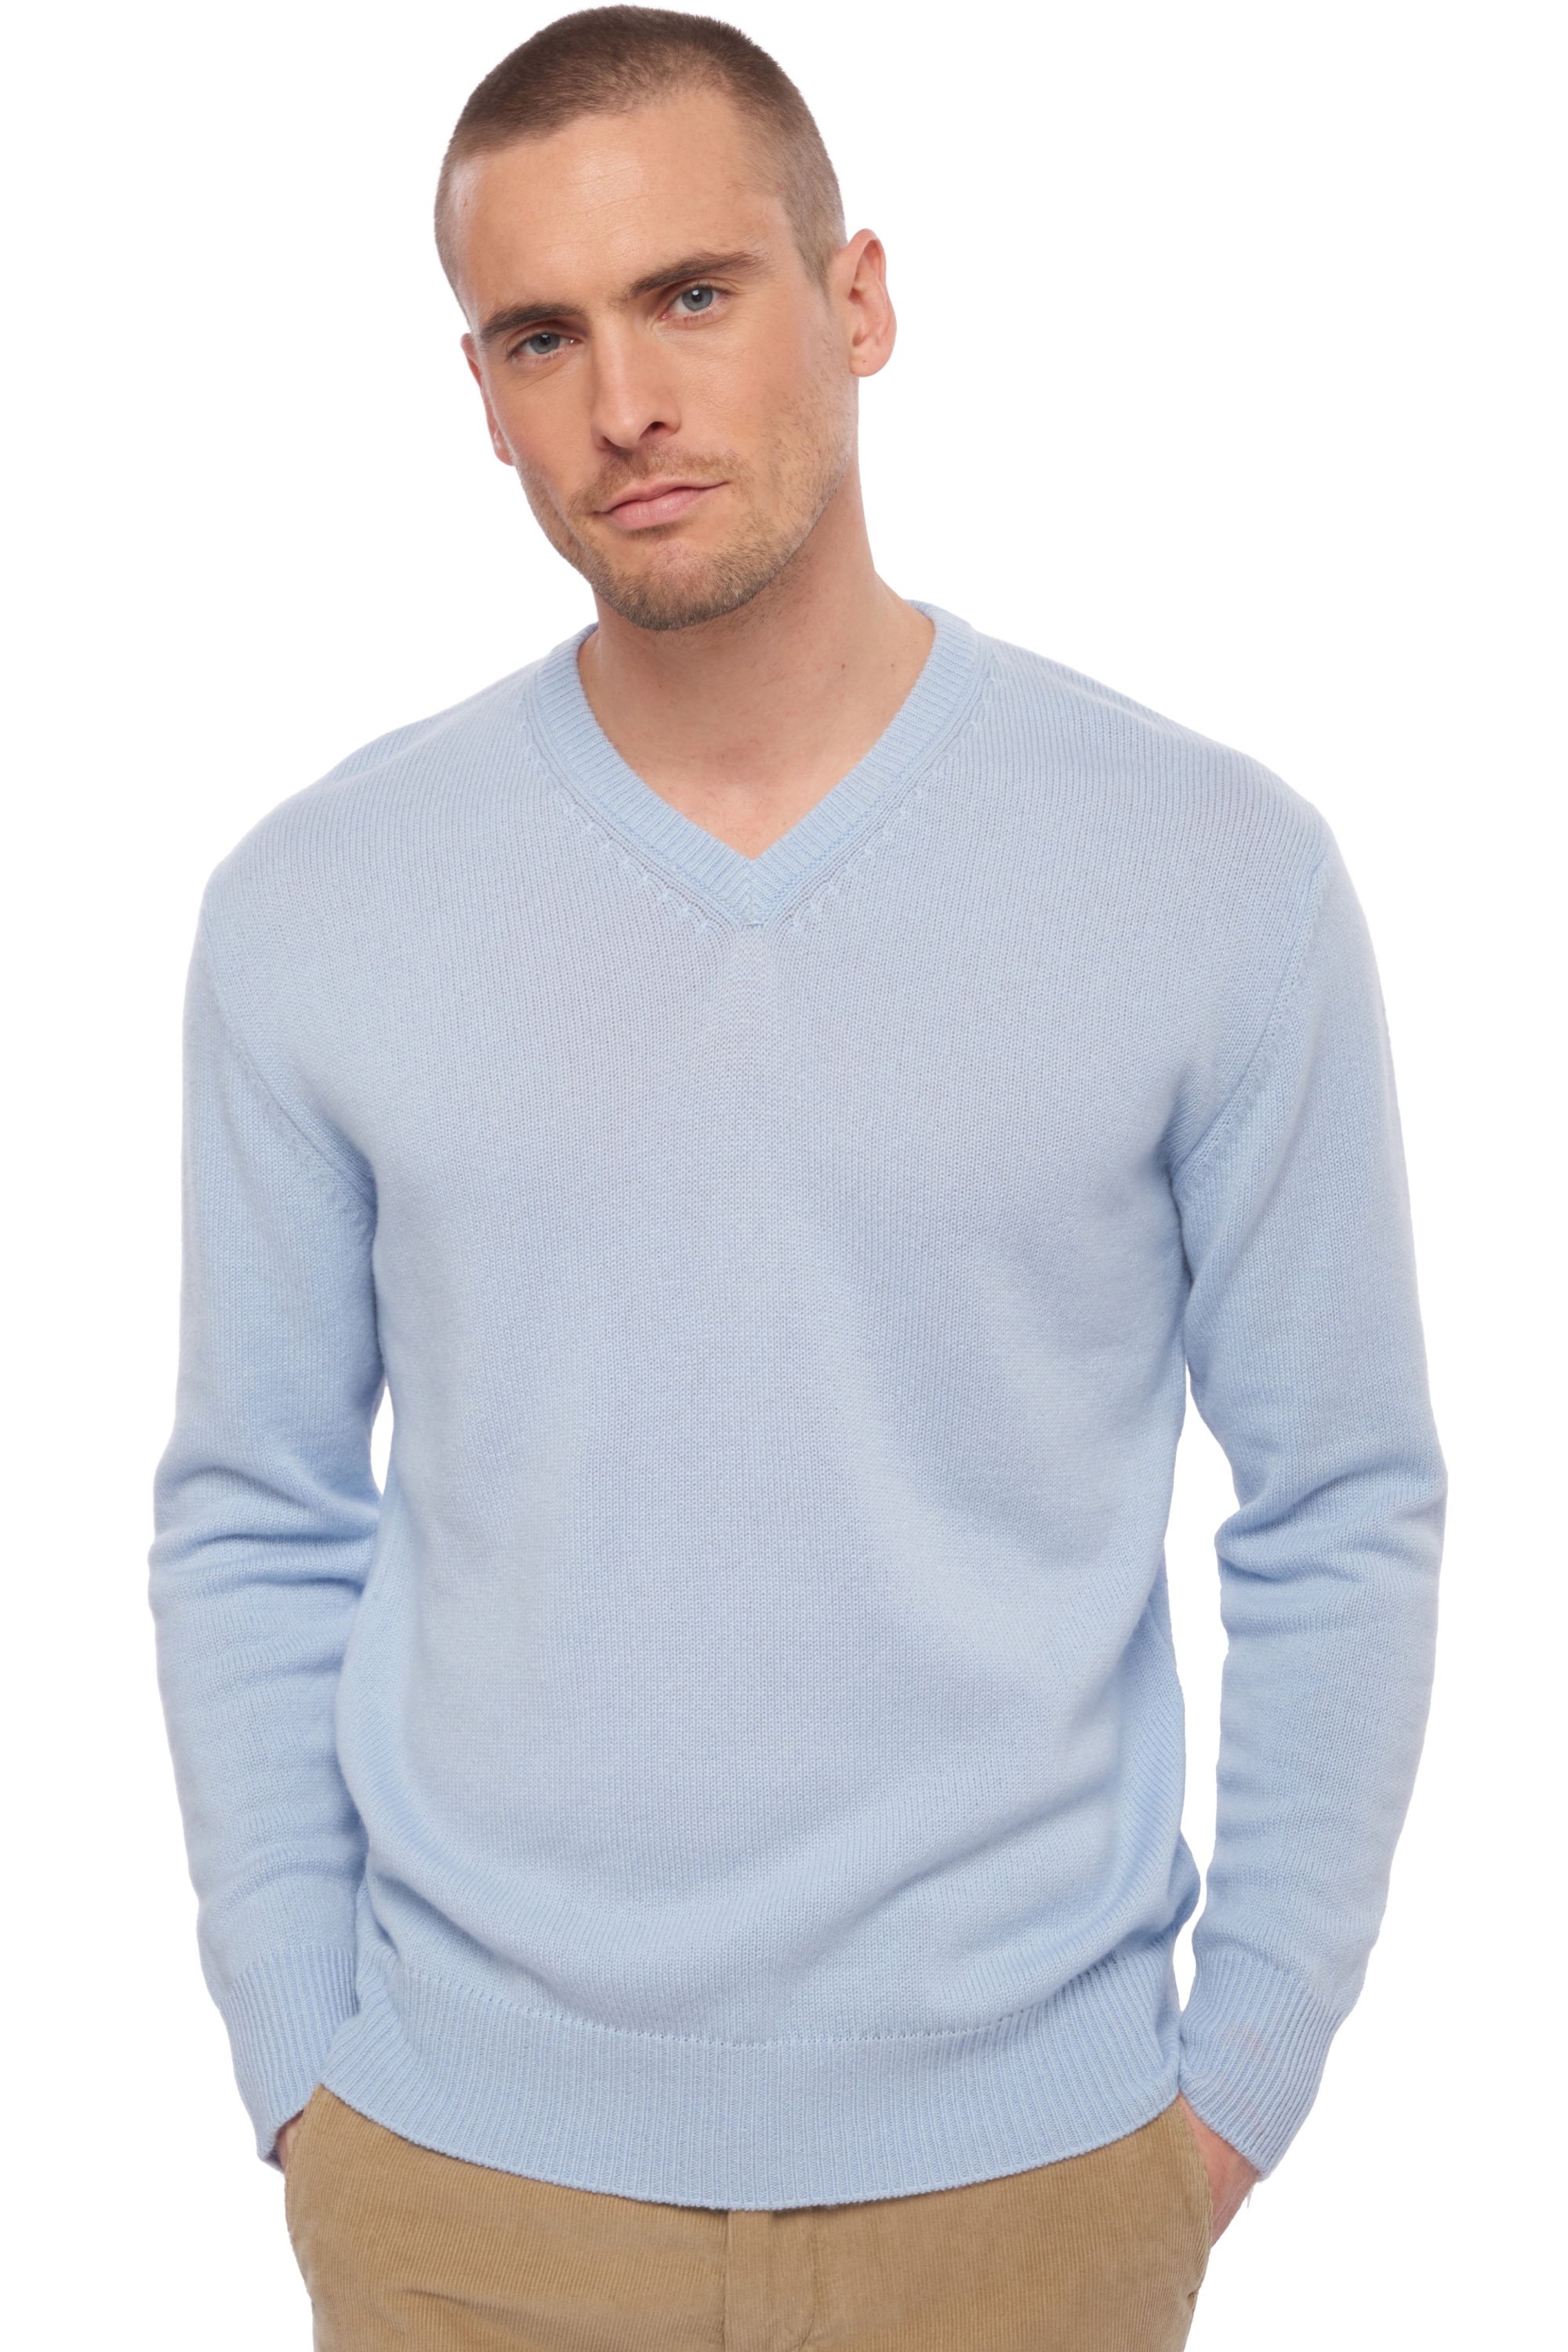 Cachemire pull homme hippolyte 4f ciel xs